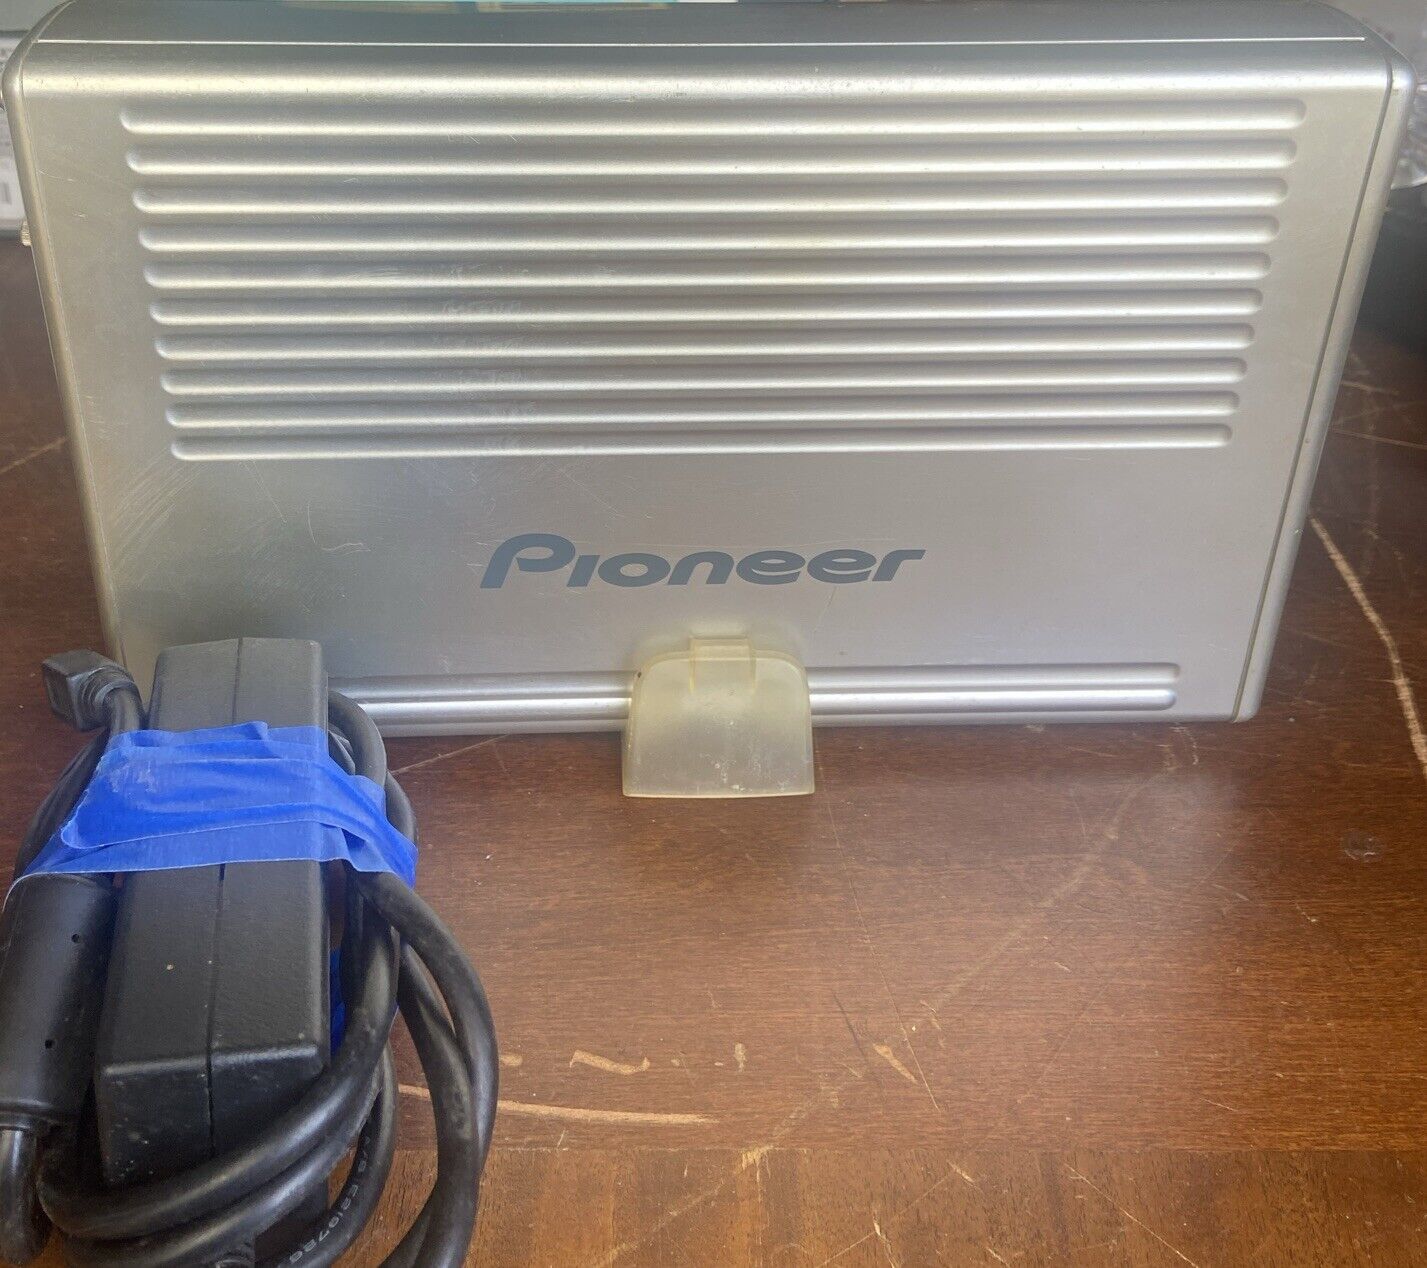 PIONEER DVR-S606 DVD R/RW. WORKED WHEN STORED. HAVE NO WAY TO TEST SO SOLD AS IS